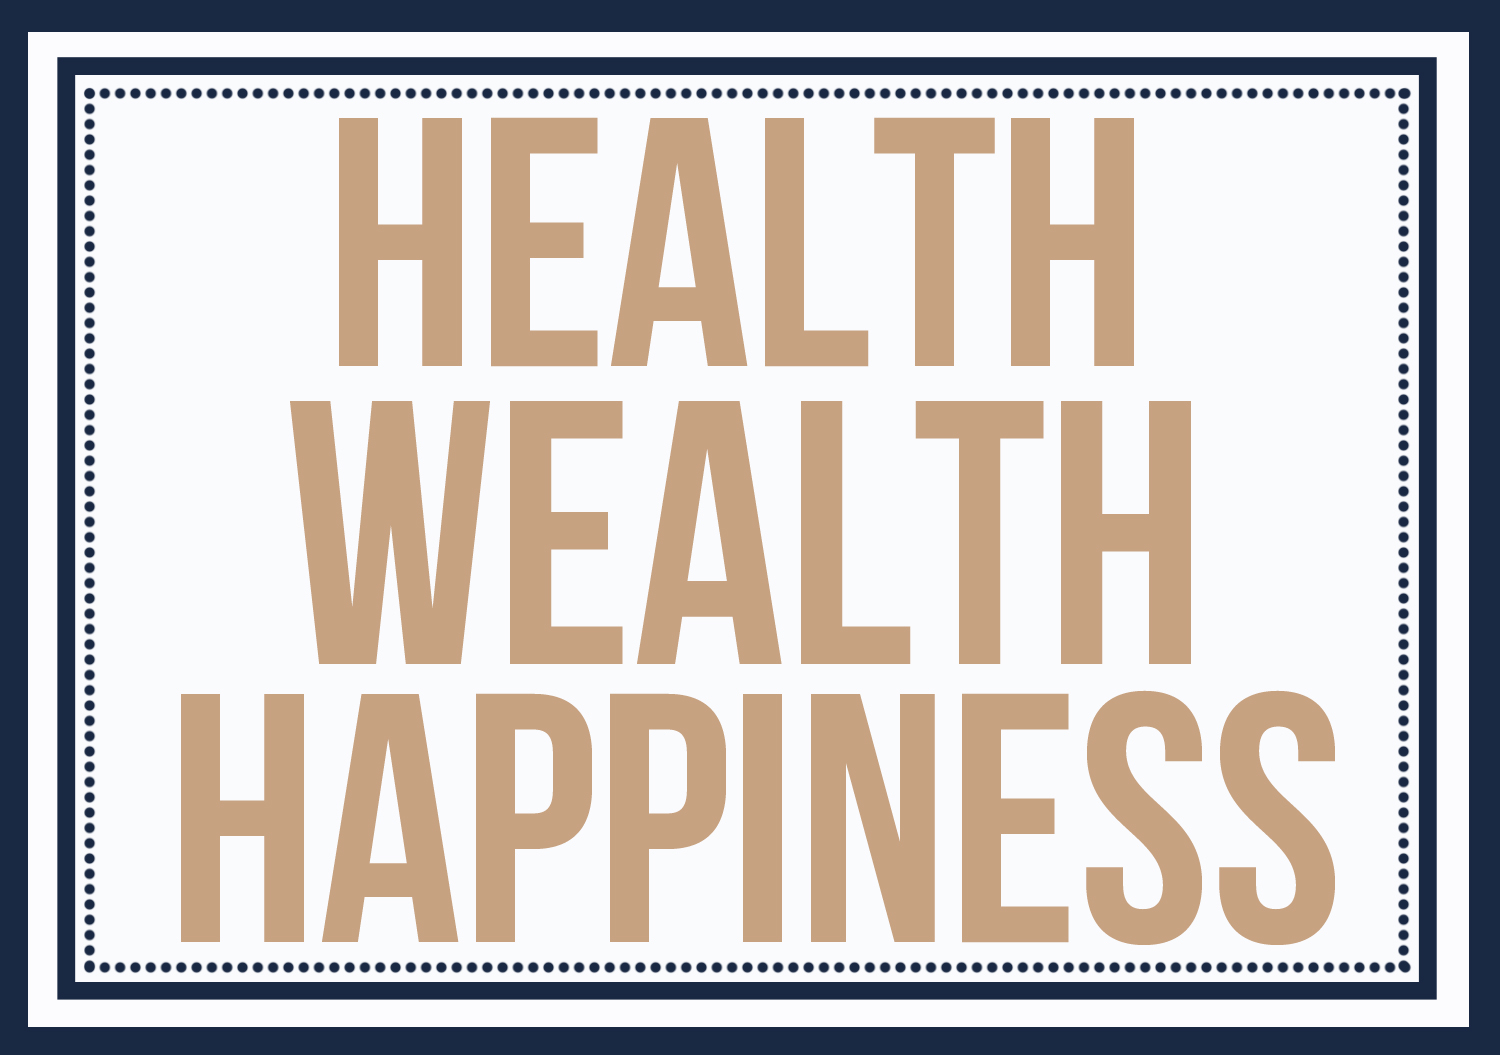 Be health and happy. Health and Wealth. Health is a New Wealth толстовка. Healthy and wealthy клипарт. Health is Wealth.